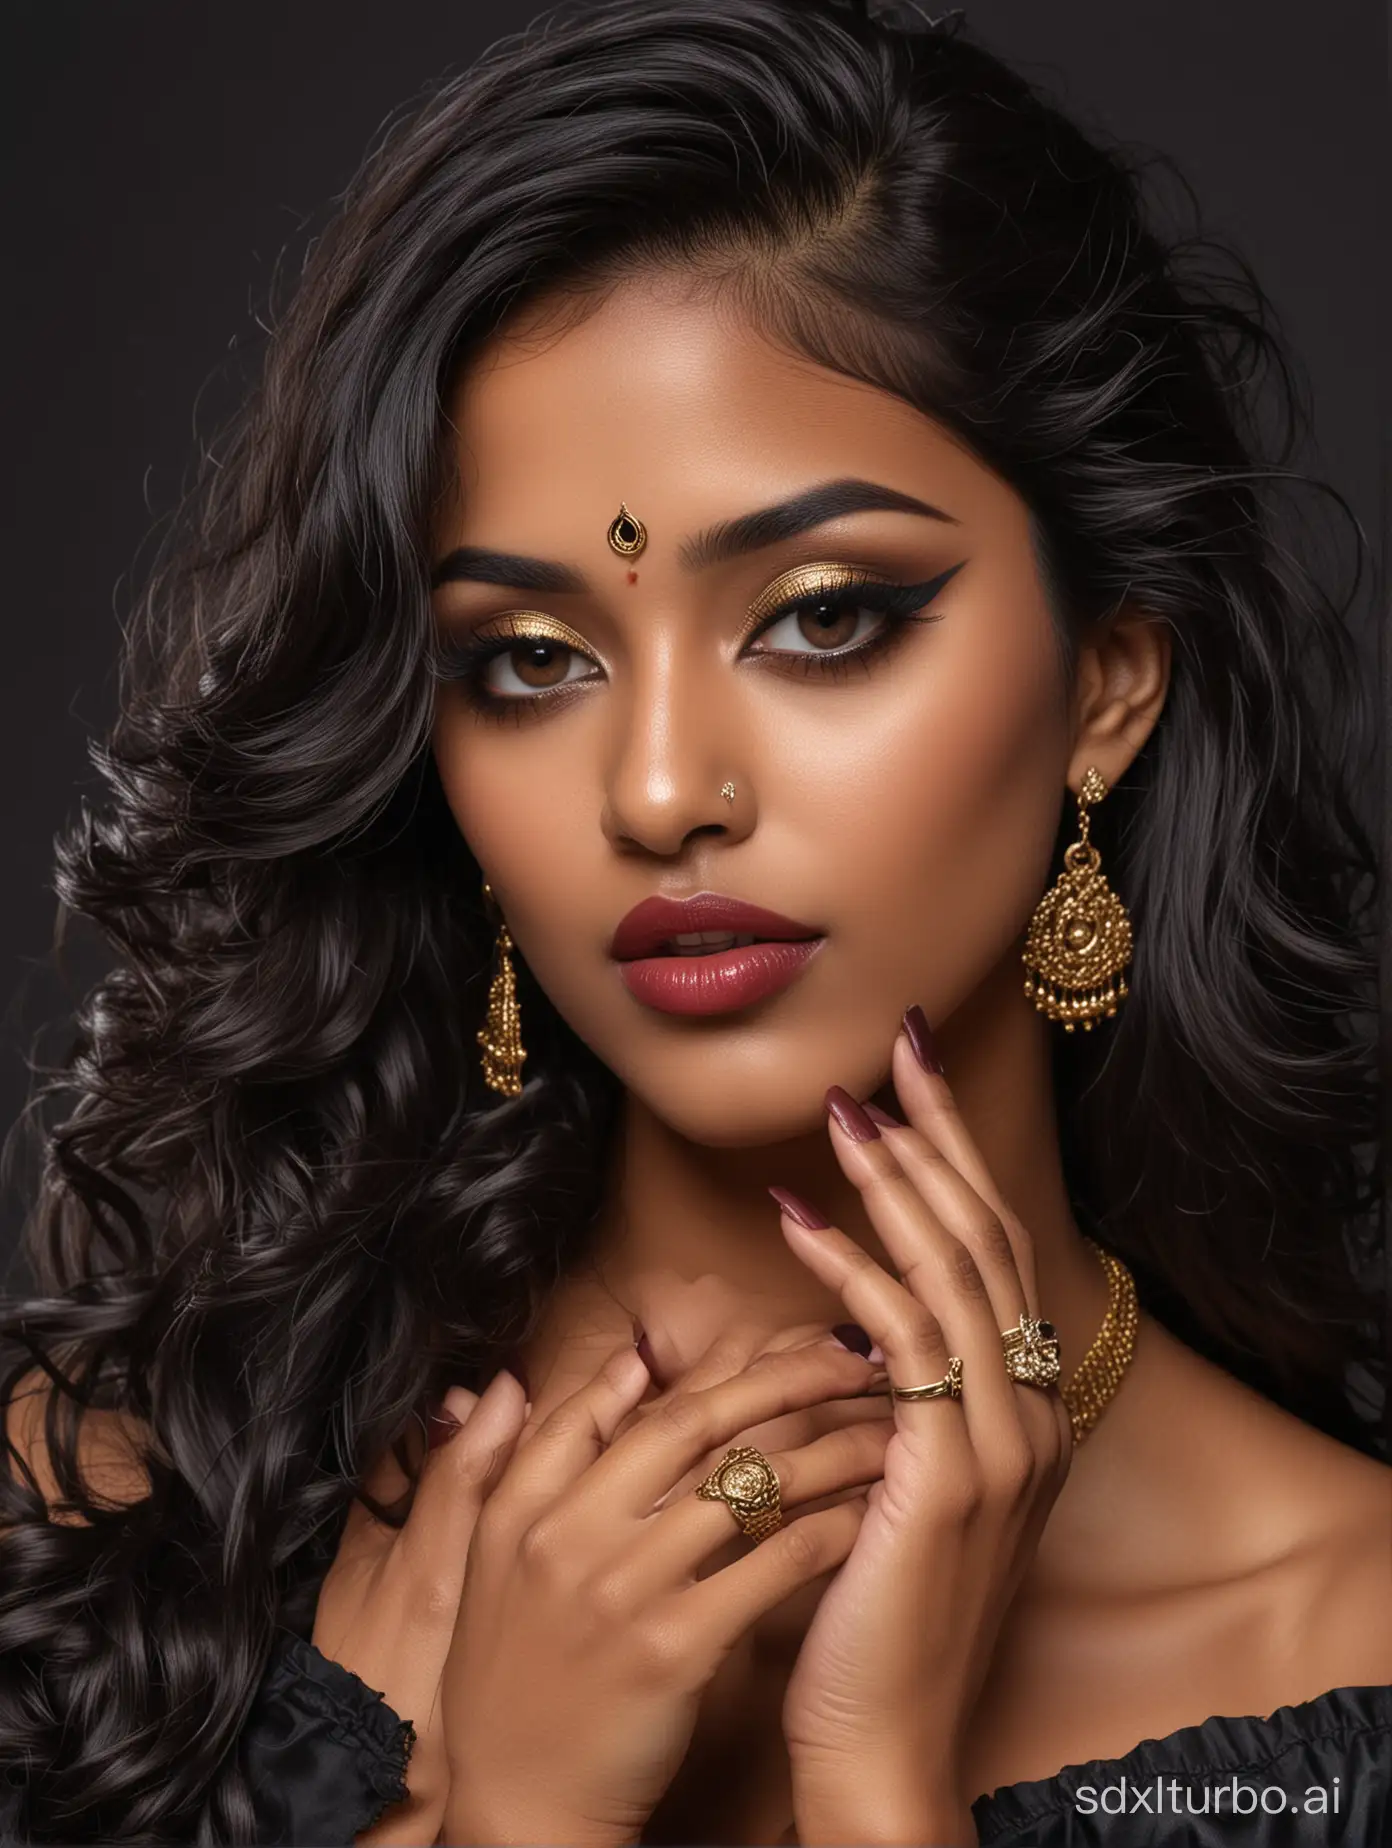 hyper realistic Closeup shot image of an tan black colored south indian tamil lady, wearing Christian nun dress,straight curly glossy hair, glossy leather corset outfit, wearing gold jewellery nose pentant and ring in lips jwellery,flawless glossy makeup and glossy burgundy lips, kissing lips, nude breast,golden black eyeshadow and dramatic eyelashes silver grey colour contact lenses,eye makeup, metalic black colour glossy polished finger nails, wearing stockings and high heels sitting in sofa,dark black background.